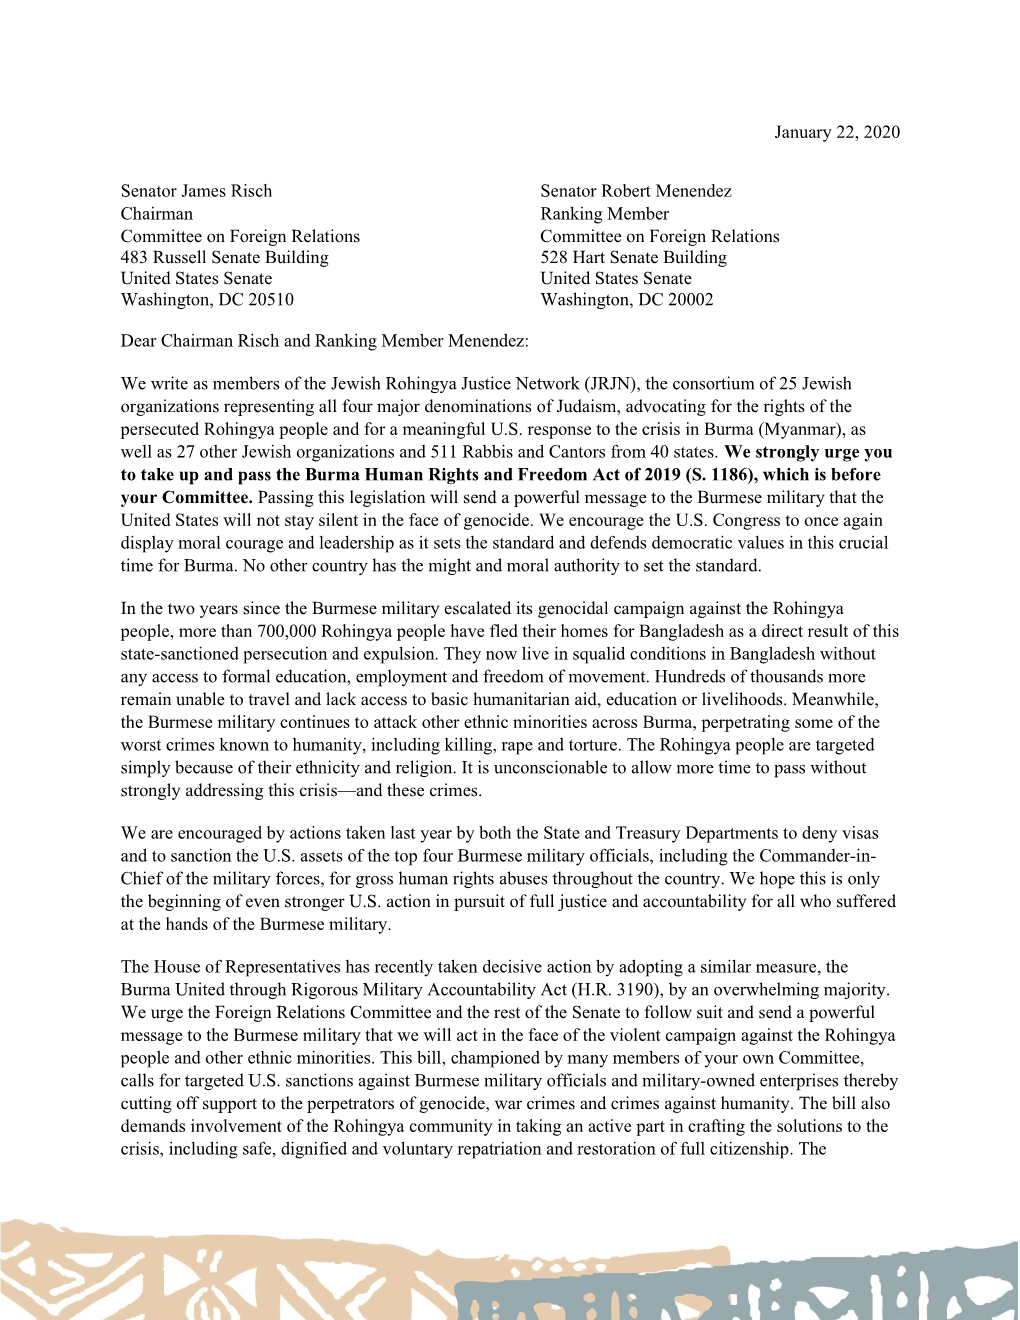 Letter to the Senate Foreign Relations Committee Demanding Action To